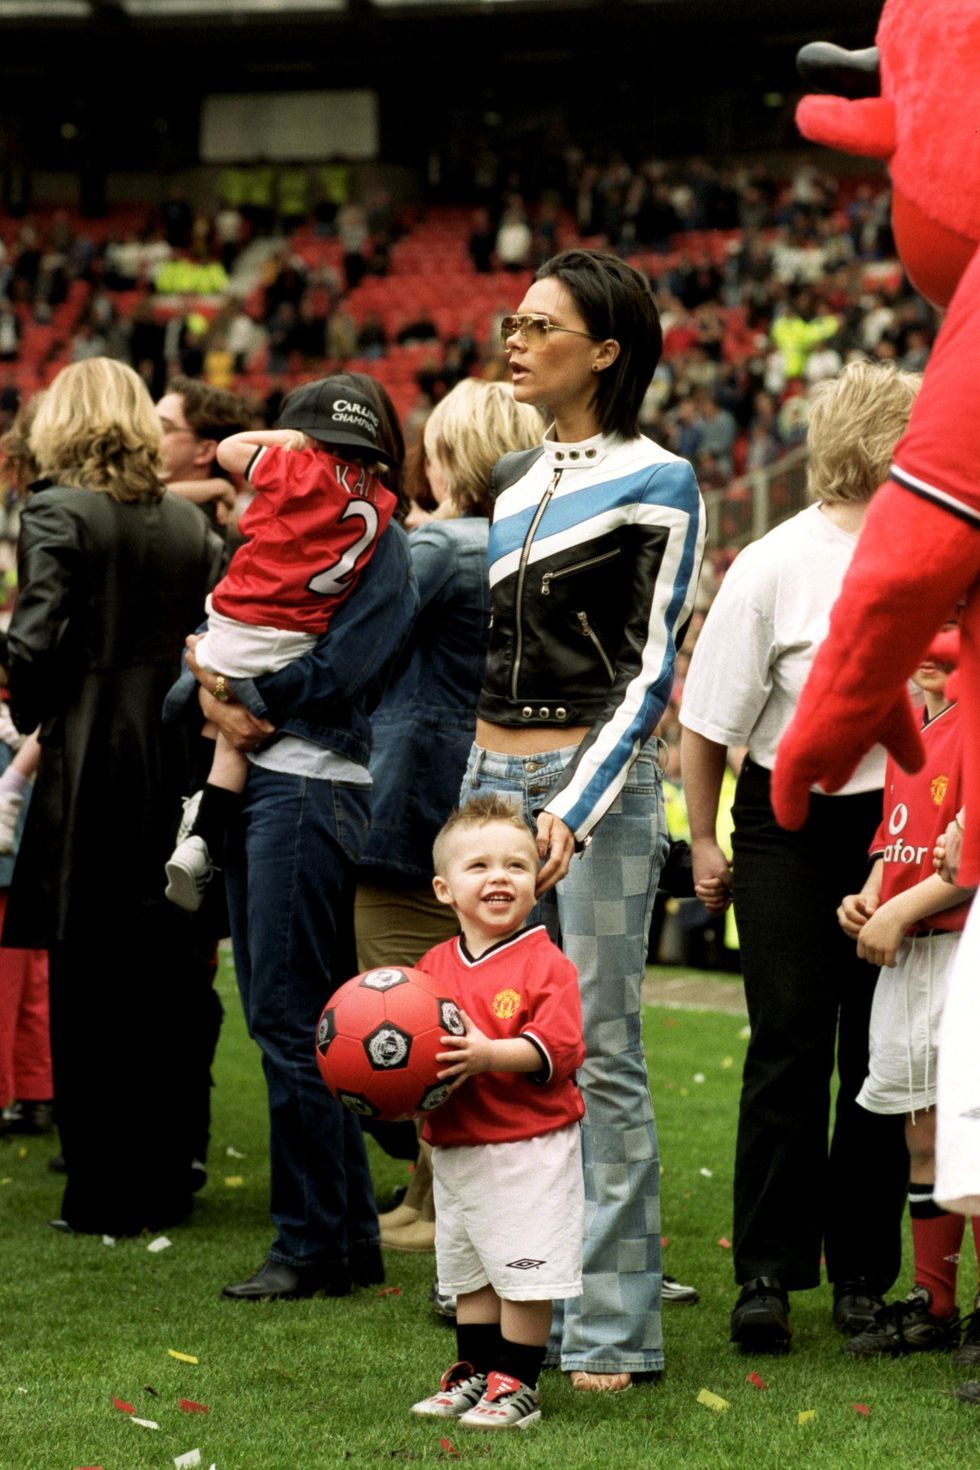 a person holding a football with a kid in a red jersey